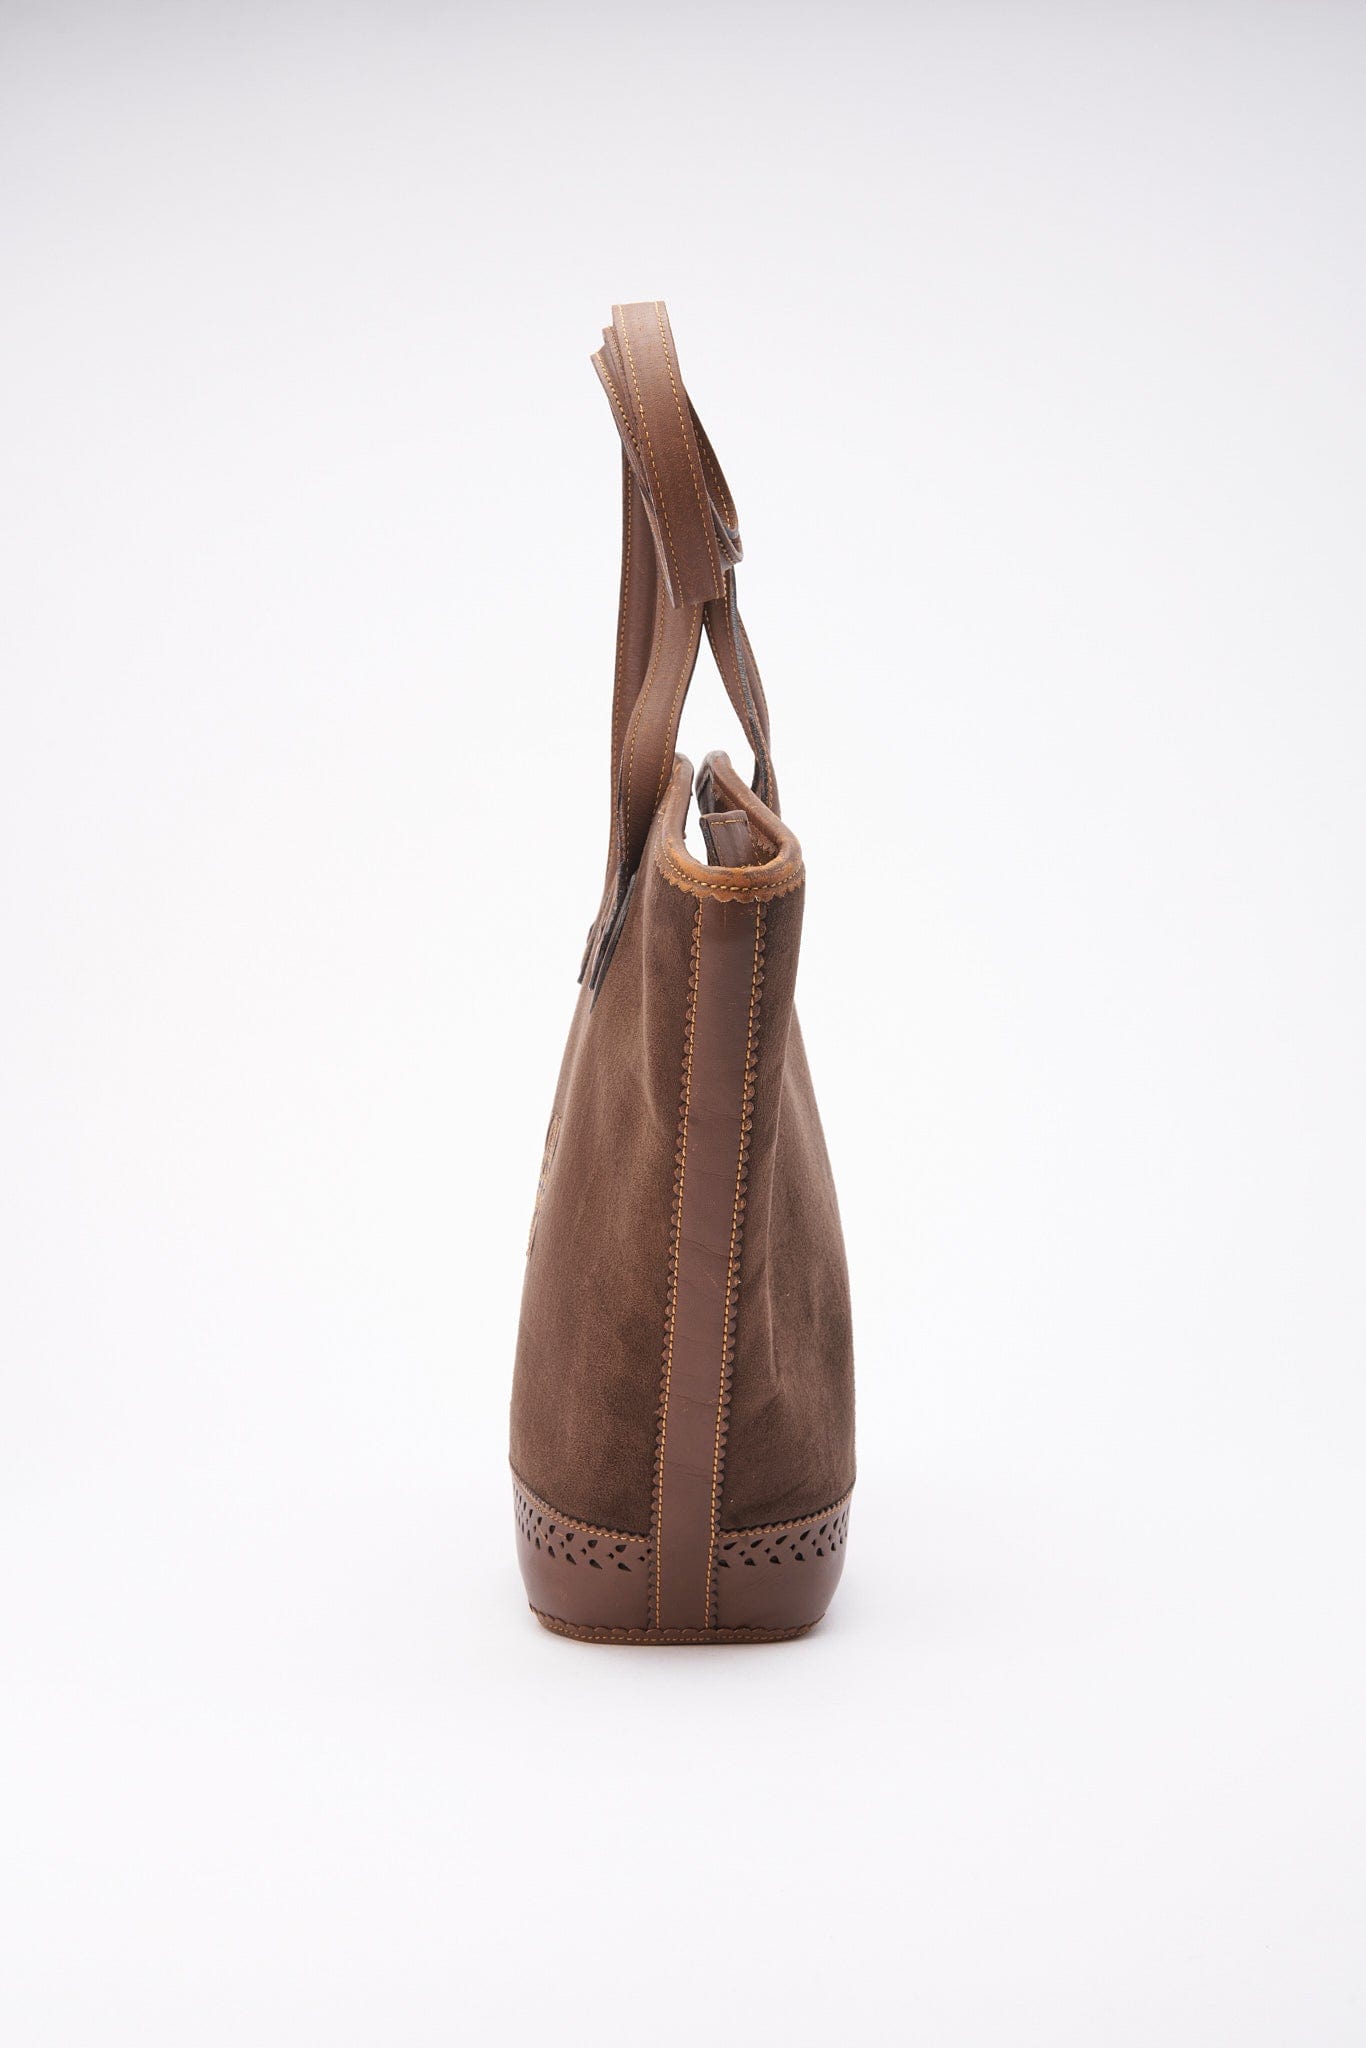 Loewe Anagram Suede and Leather Tote Bag